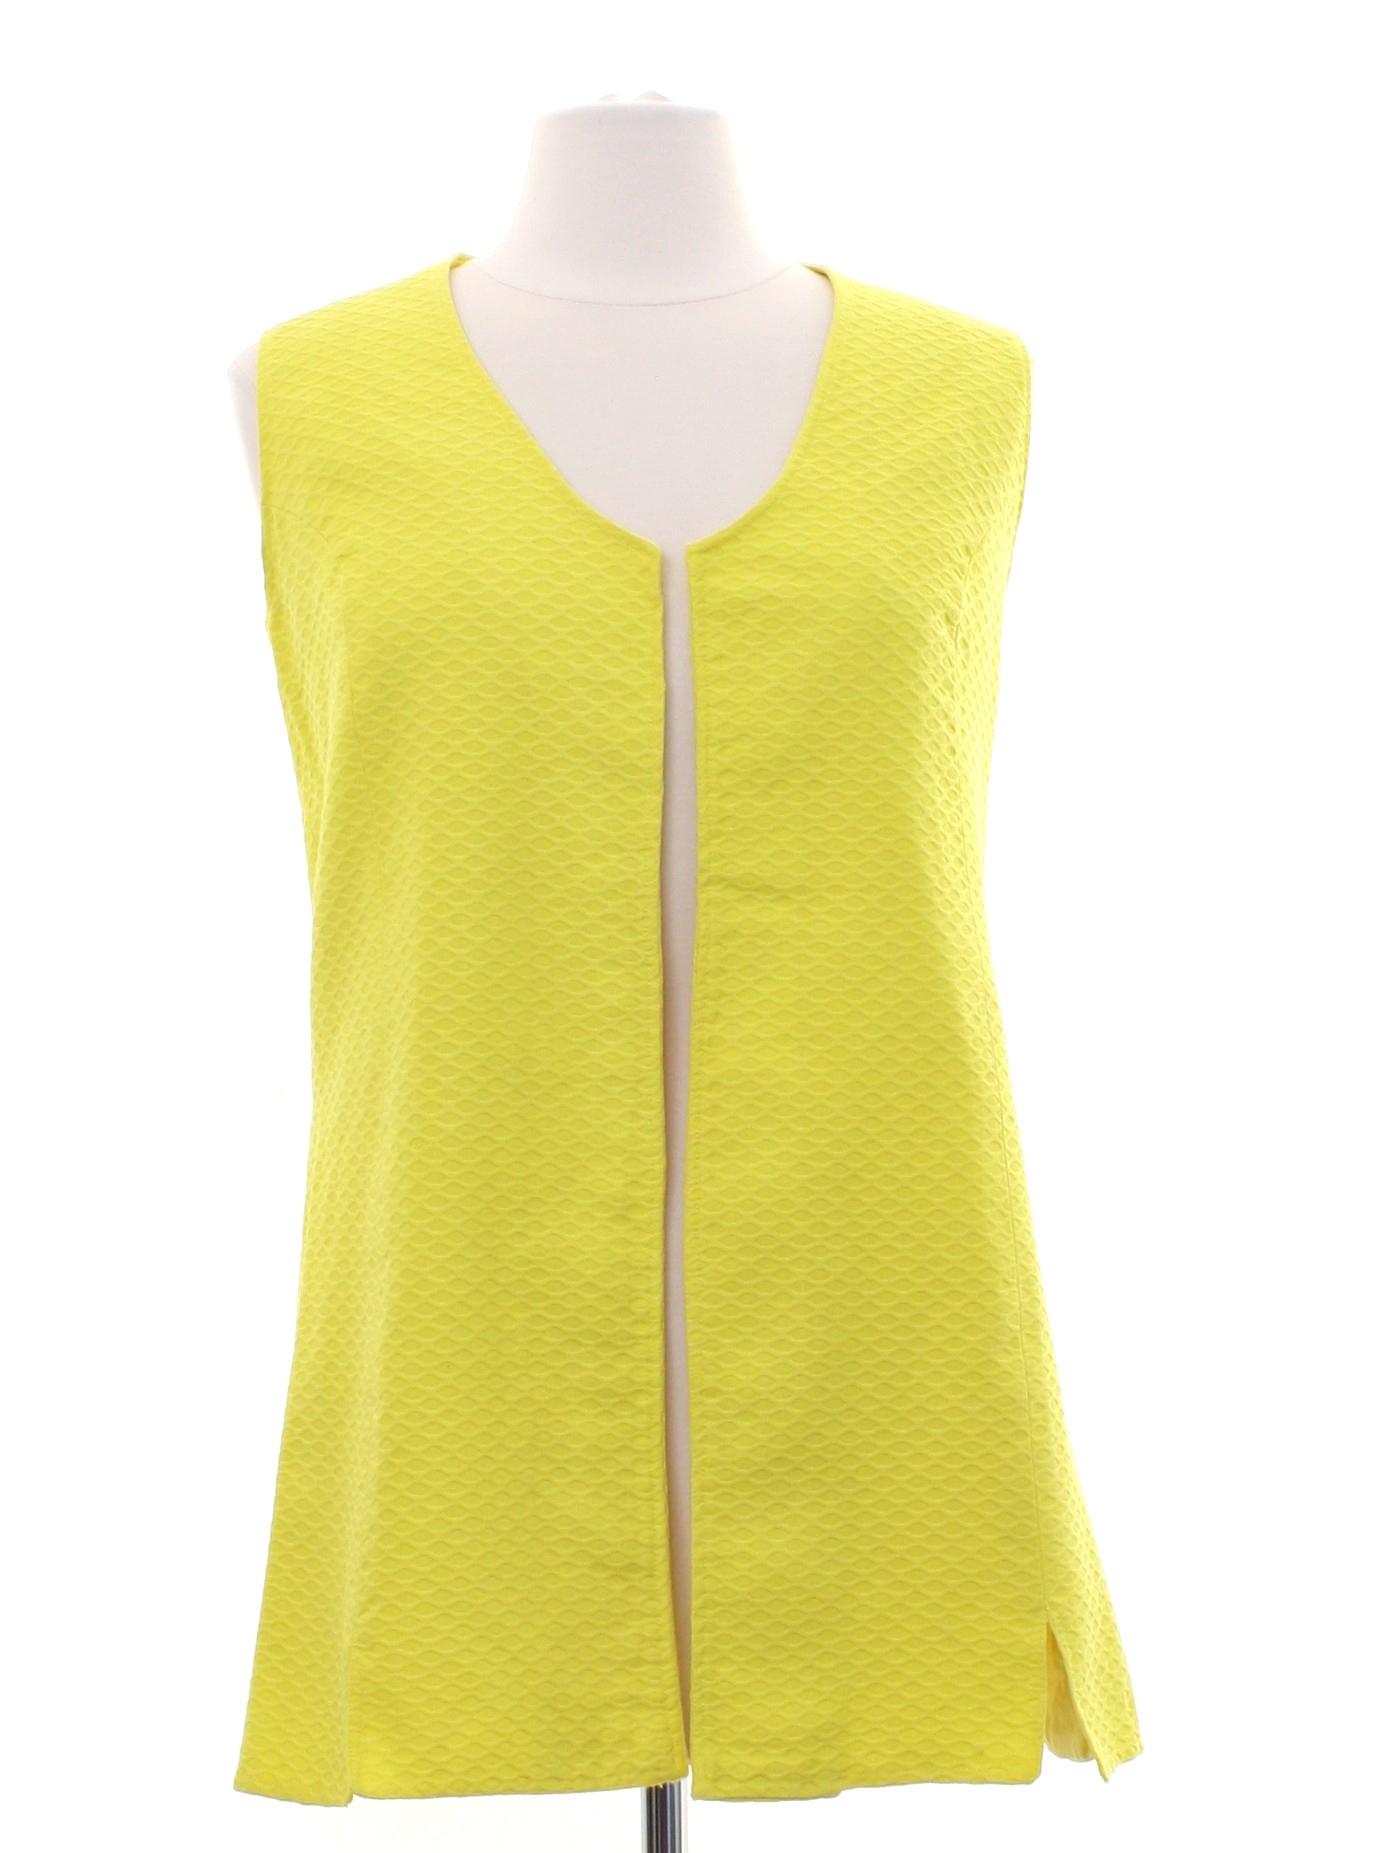 Vintage 1960's Vest: 60s -Home Sewn- Womens yellow background polyester ...